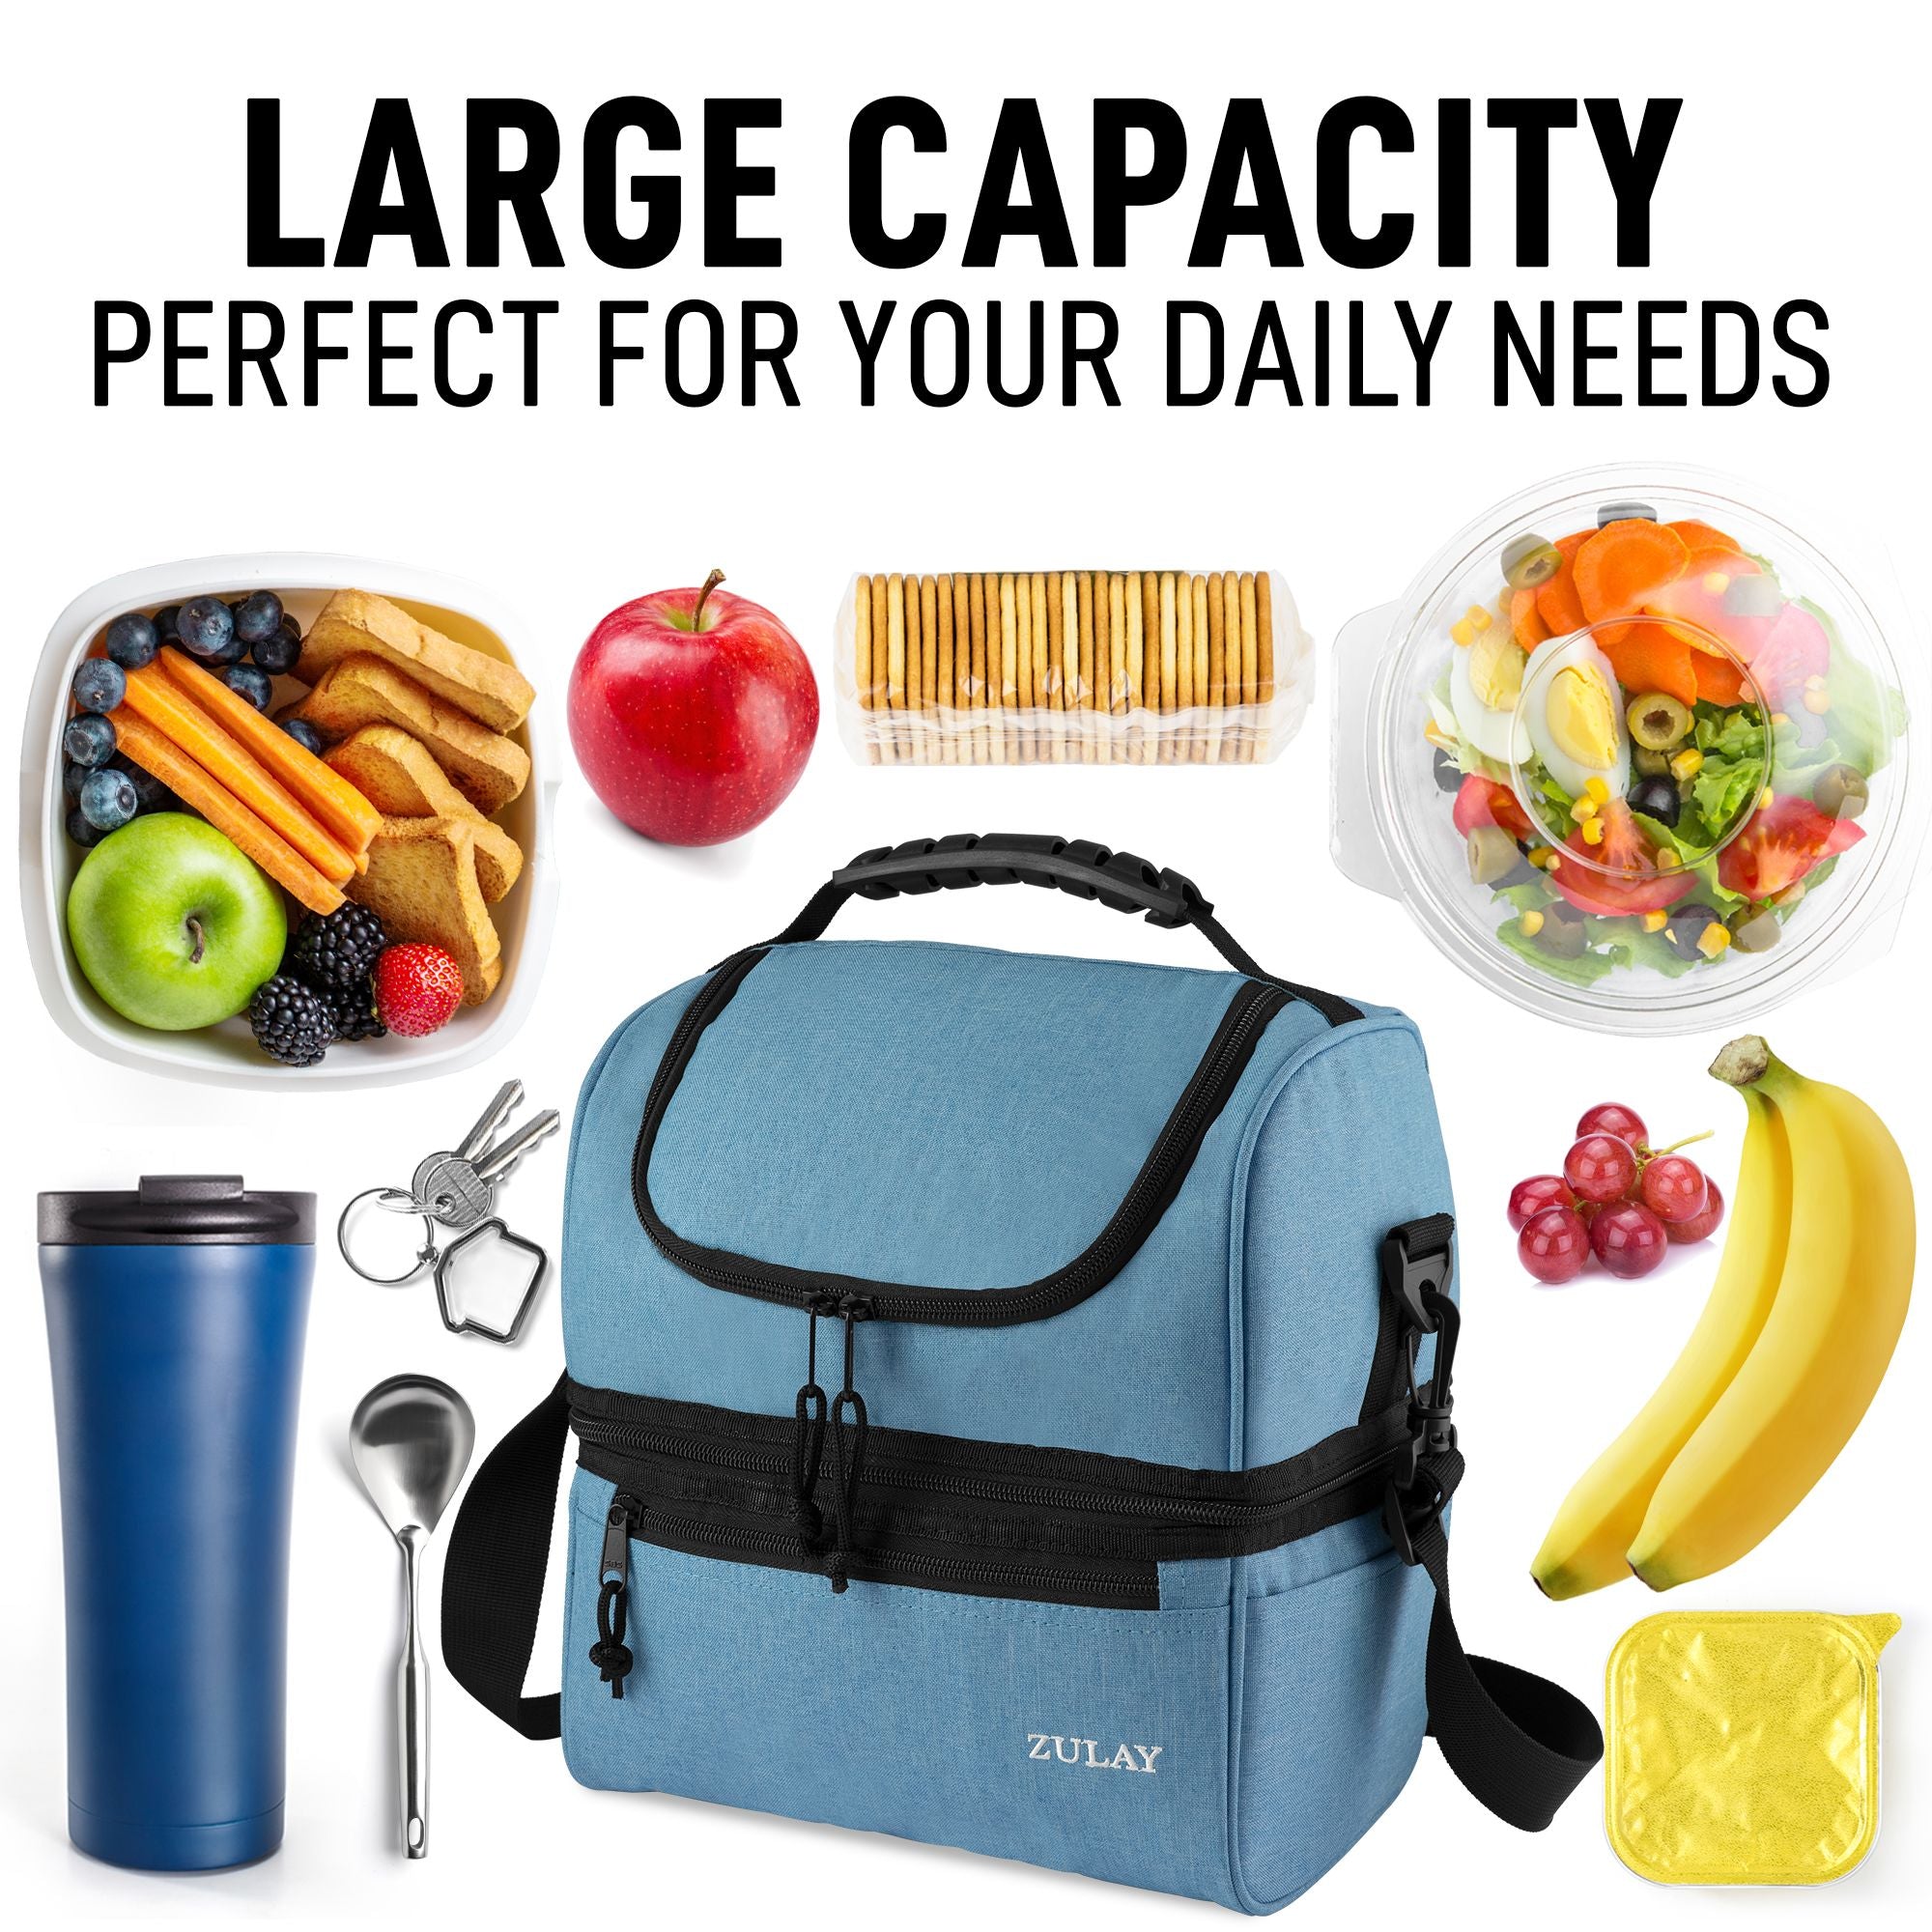 2 compartment Electric Heated Lunch Box - Inspire Uplift